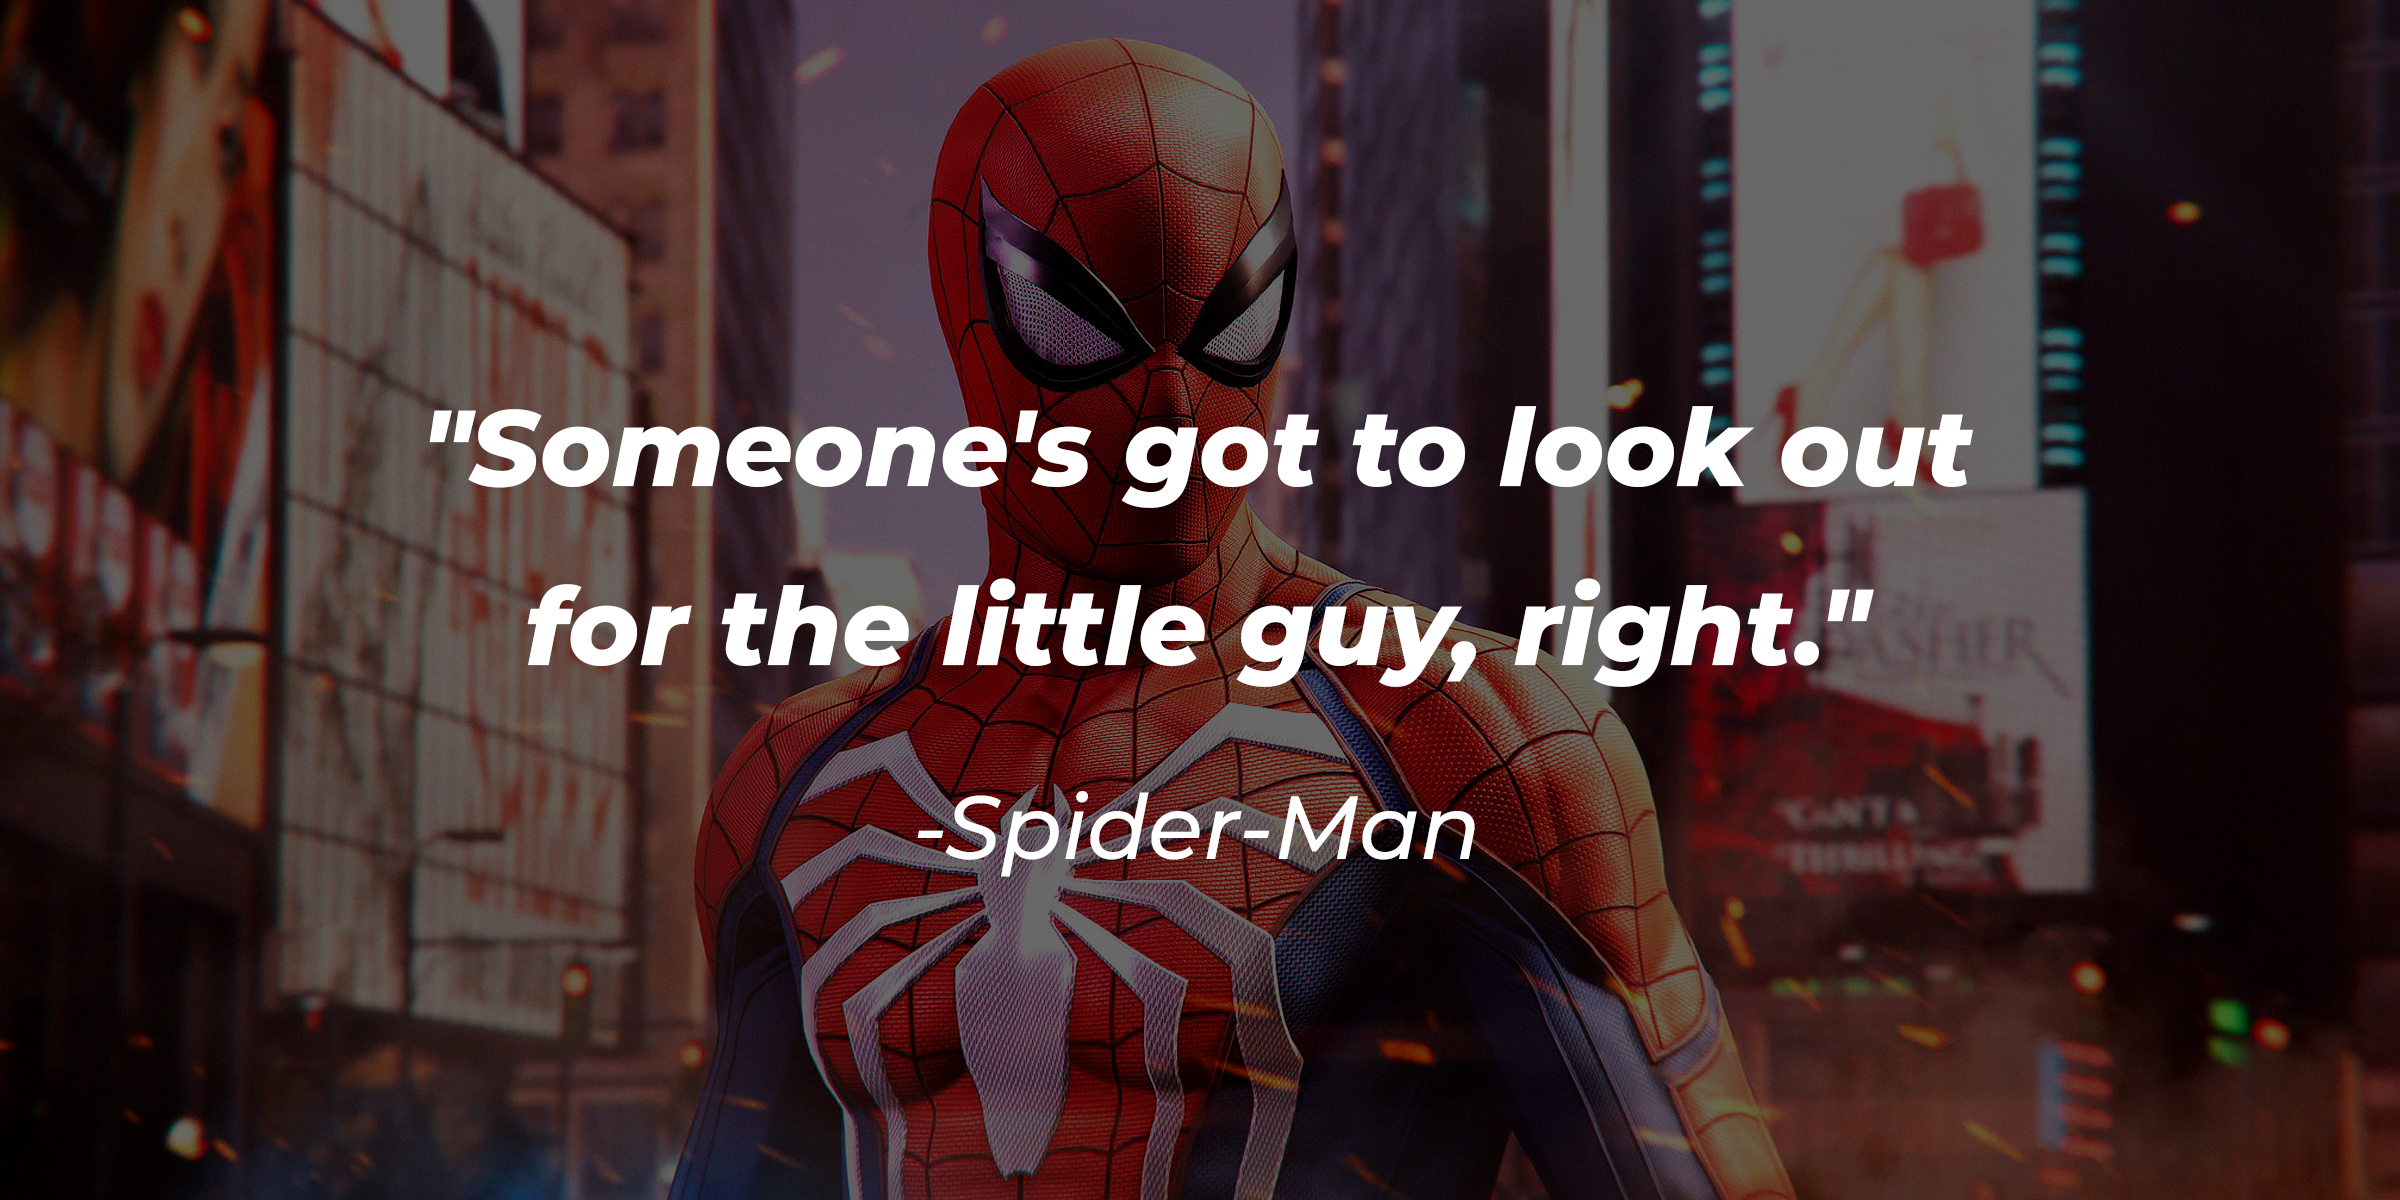 Spider-Man’s quote: "Someone's got to look out for the little guy, right." | Source: Facebook.com/spiderman